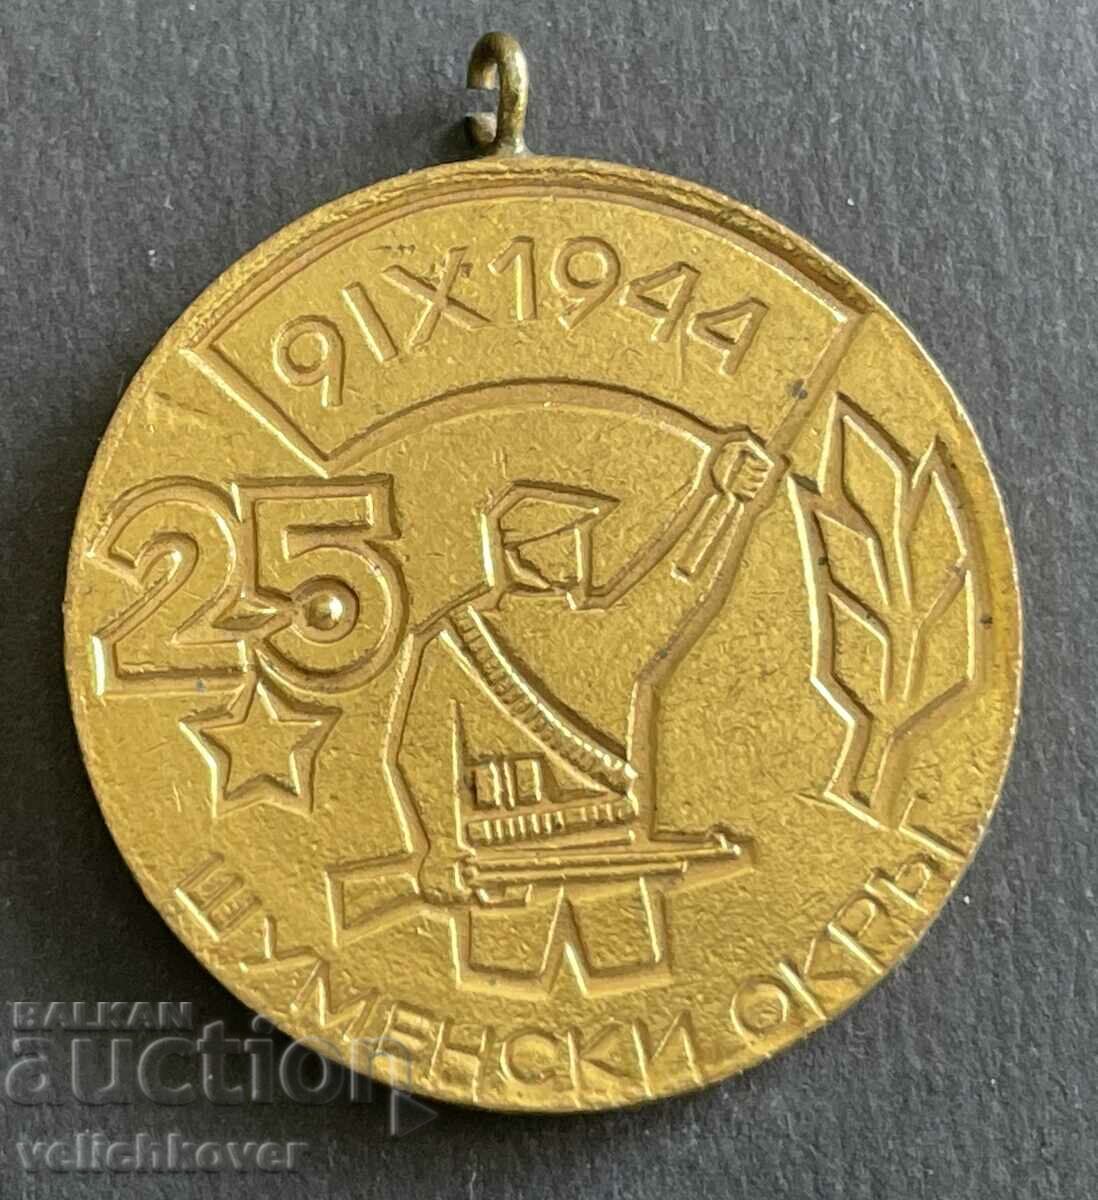 37248 Bulgaria medal 25 years Shumen District To participate in social